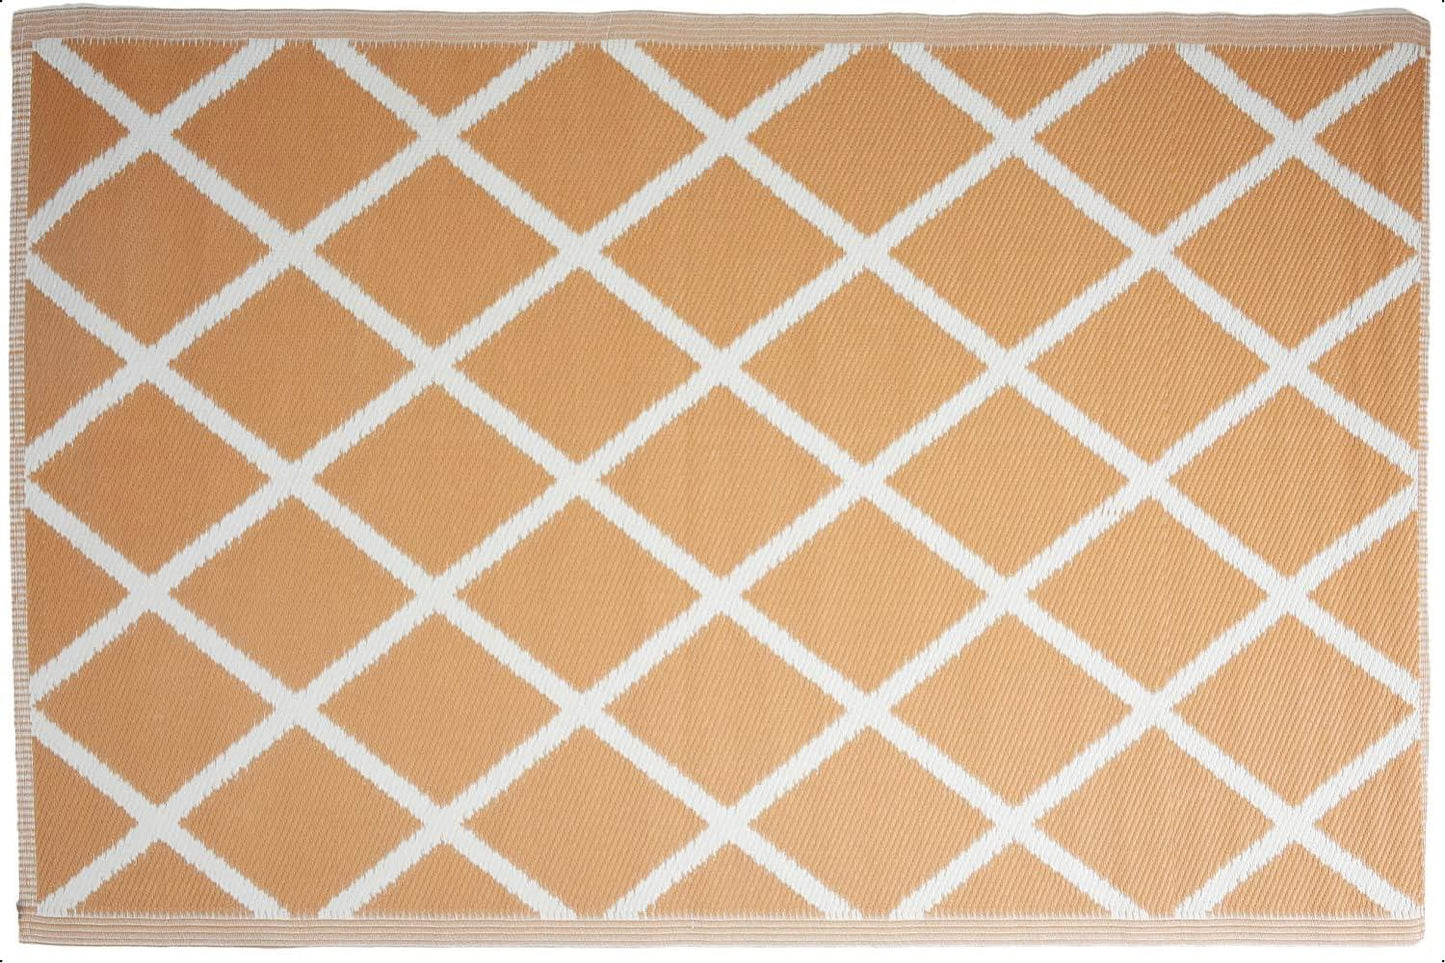 Geometric Outdoor Rugs Camping Mats Picnic Blankets 90x180cm